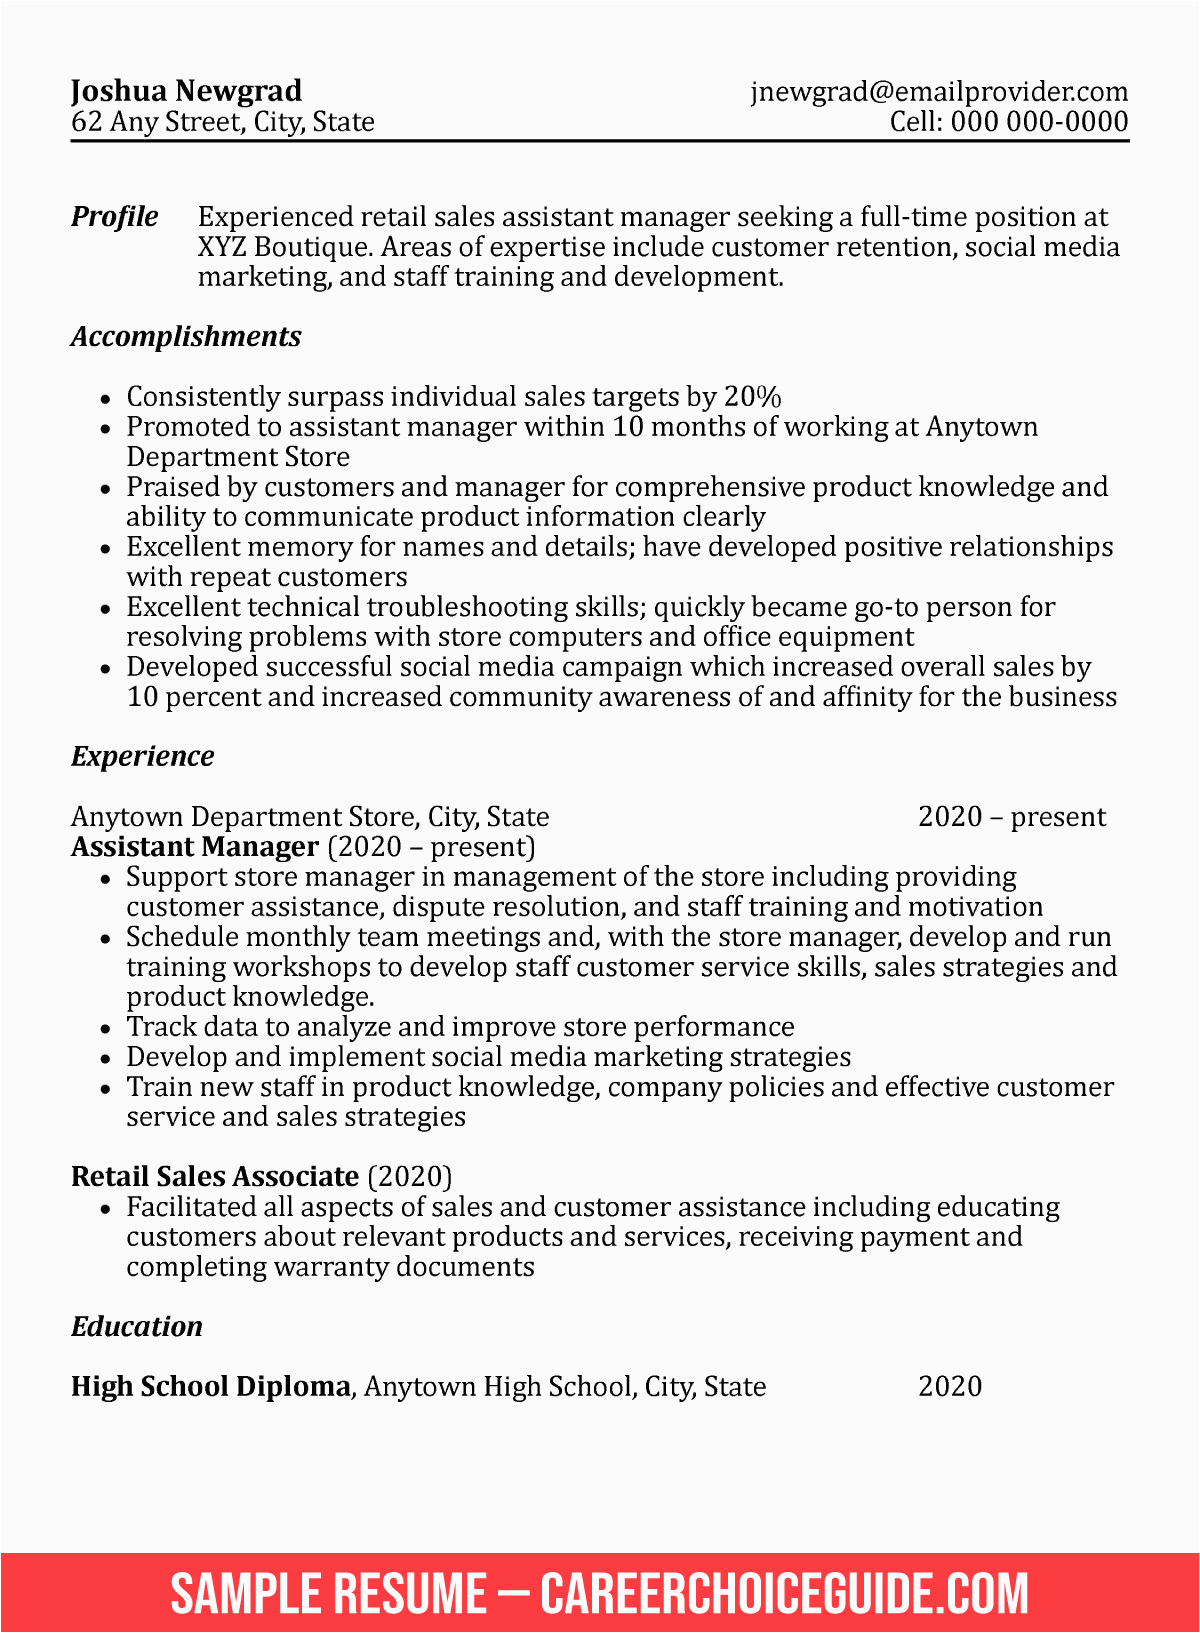 Resume Template for Recent High School Graduate High School Graduate Resume Example